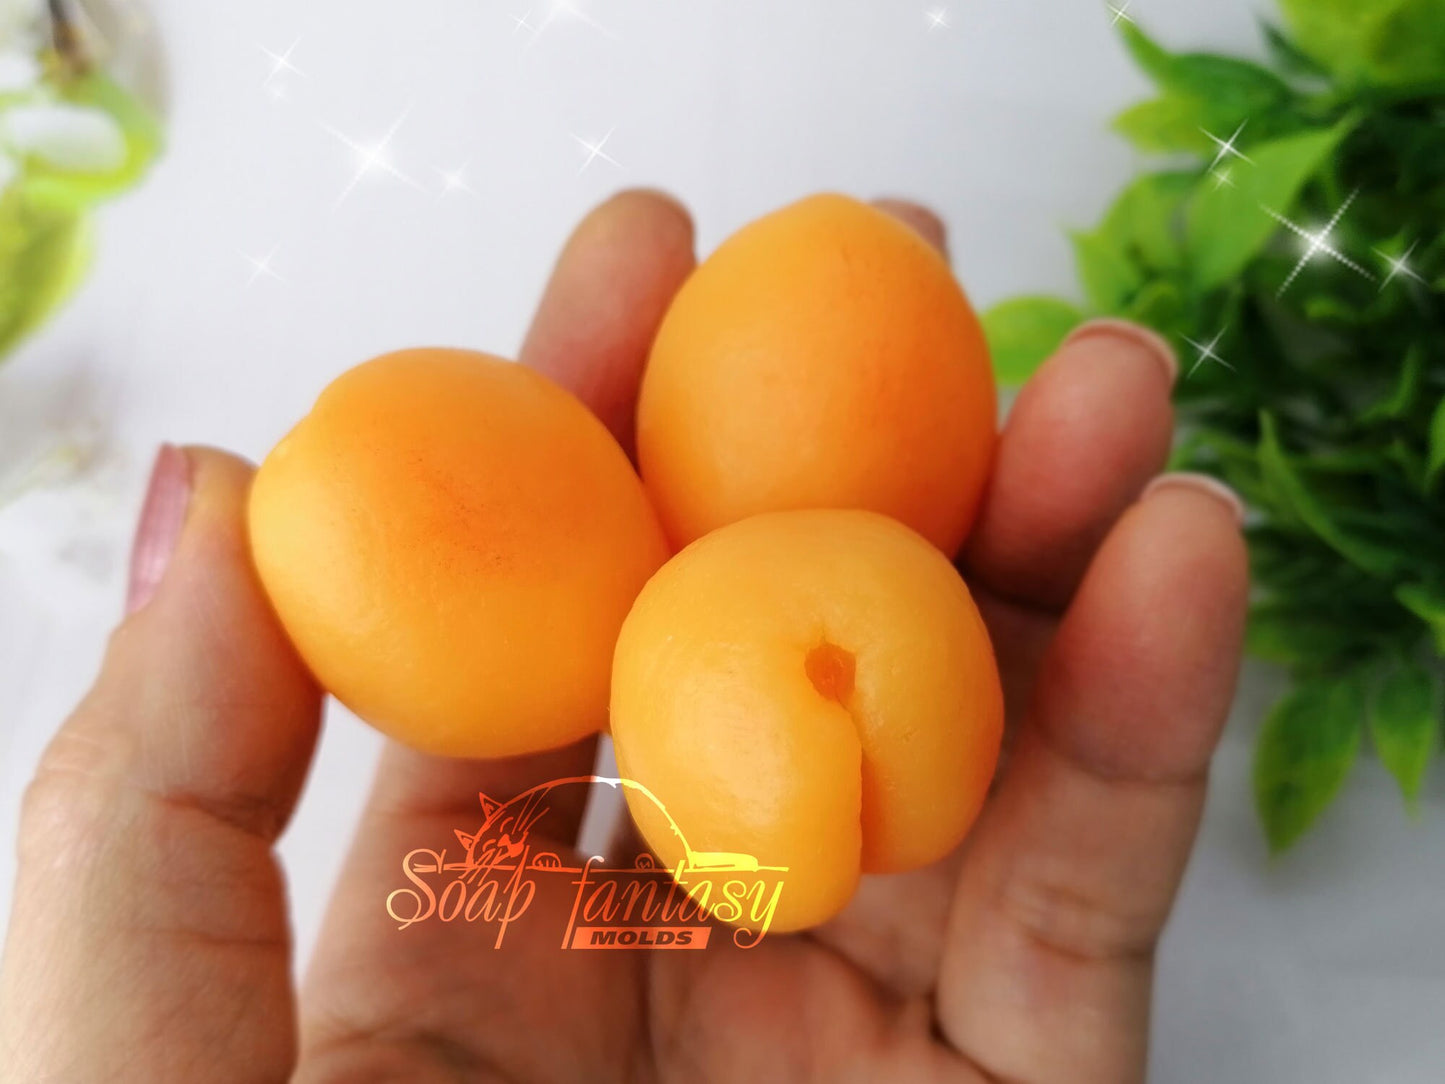 Triple apricots (bouquet inserts) silicone mold for soap making